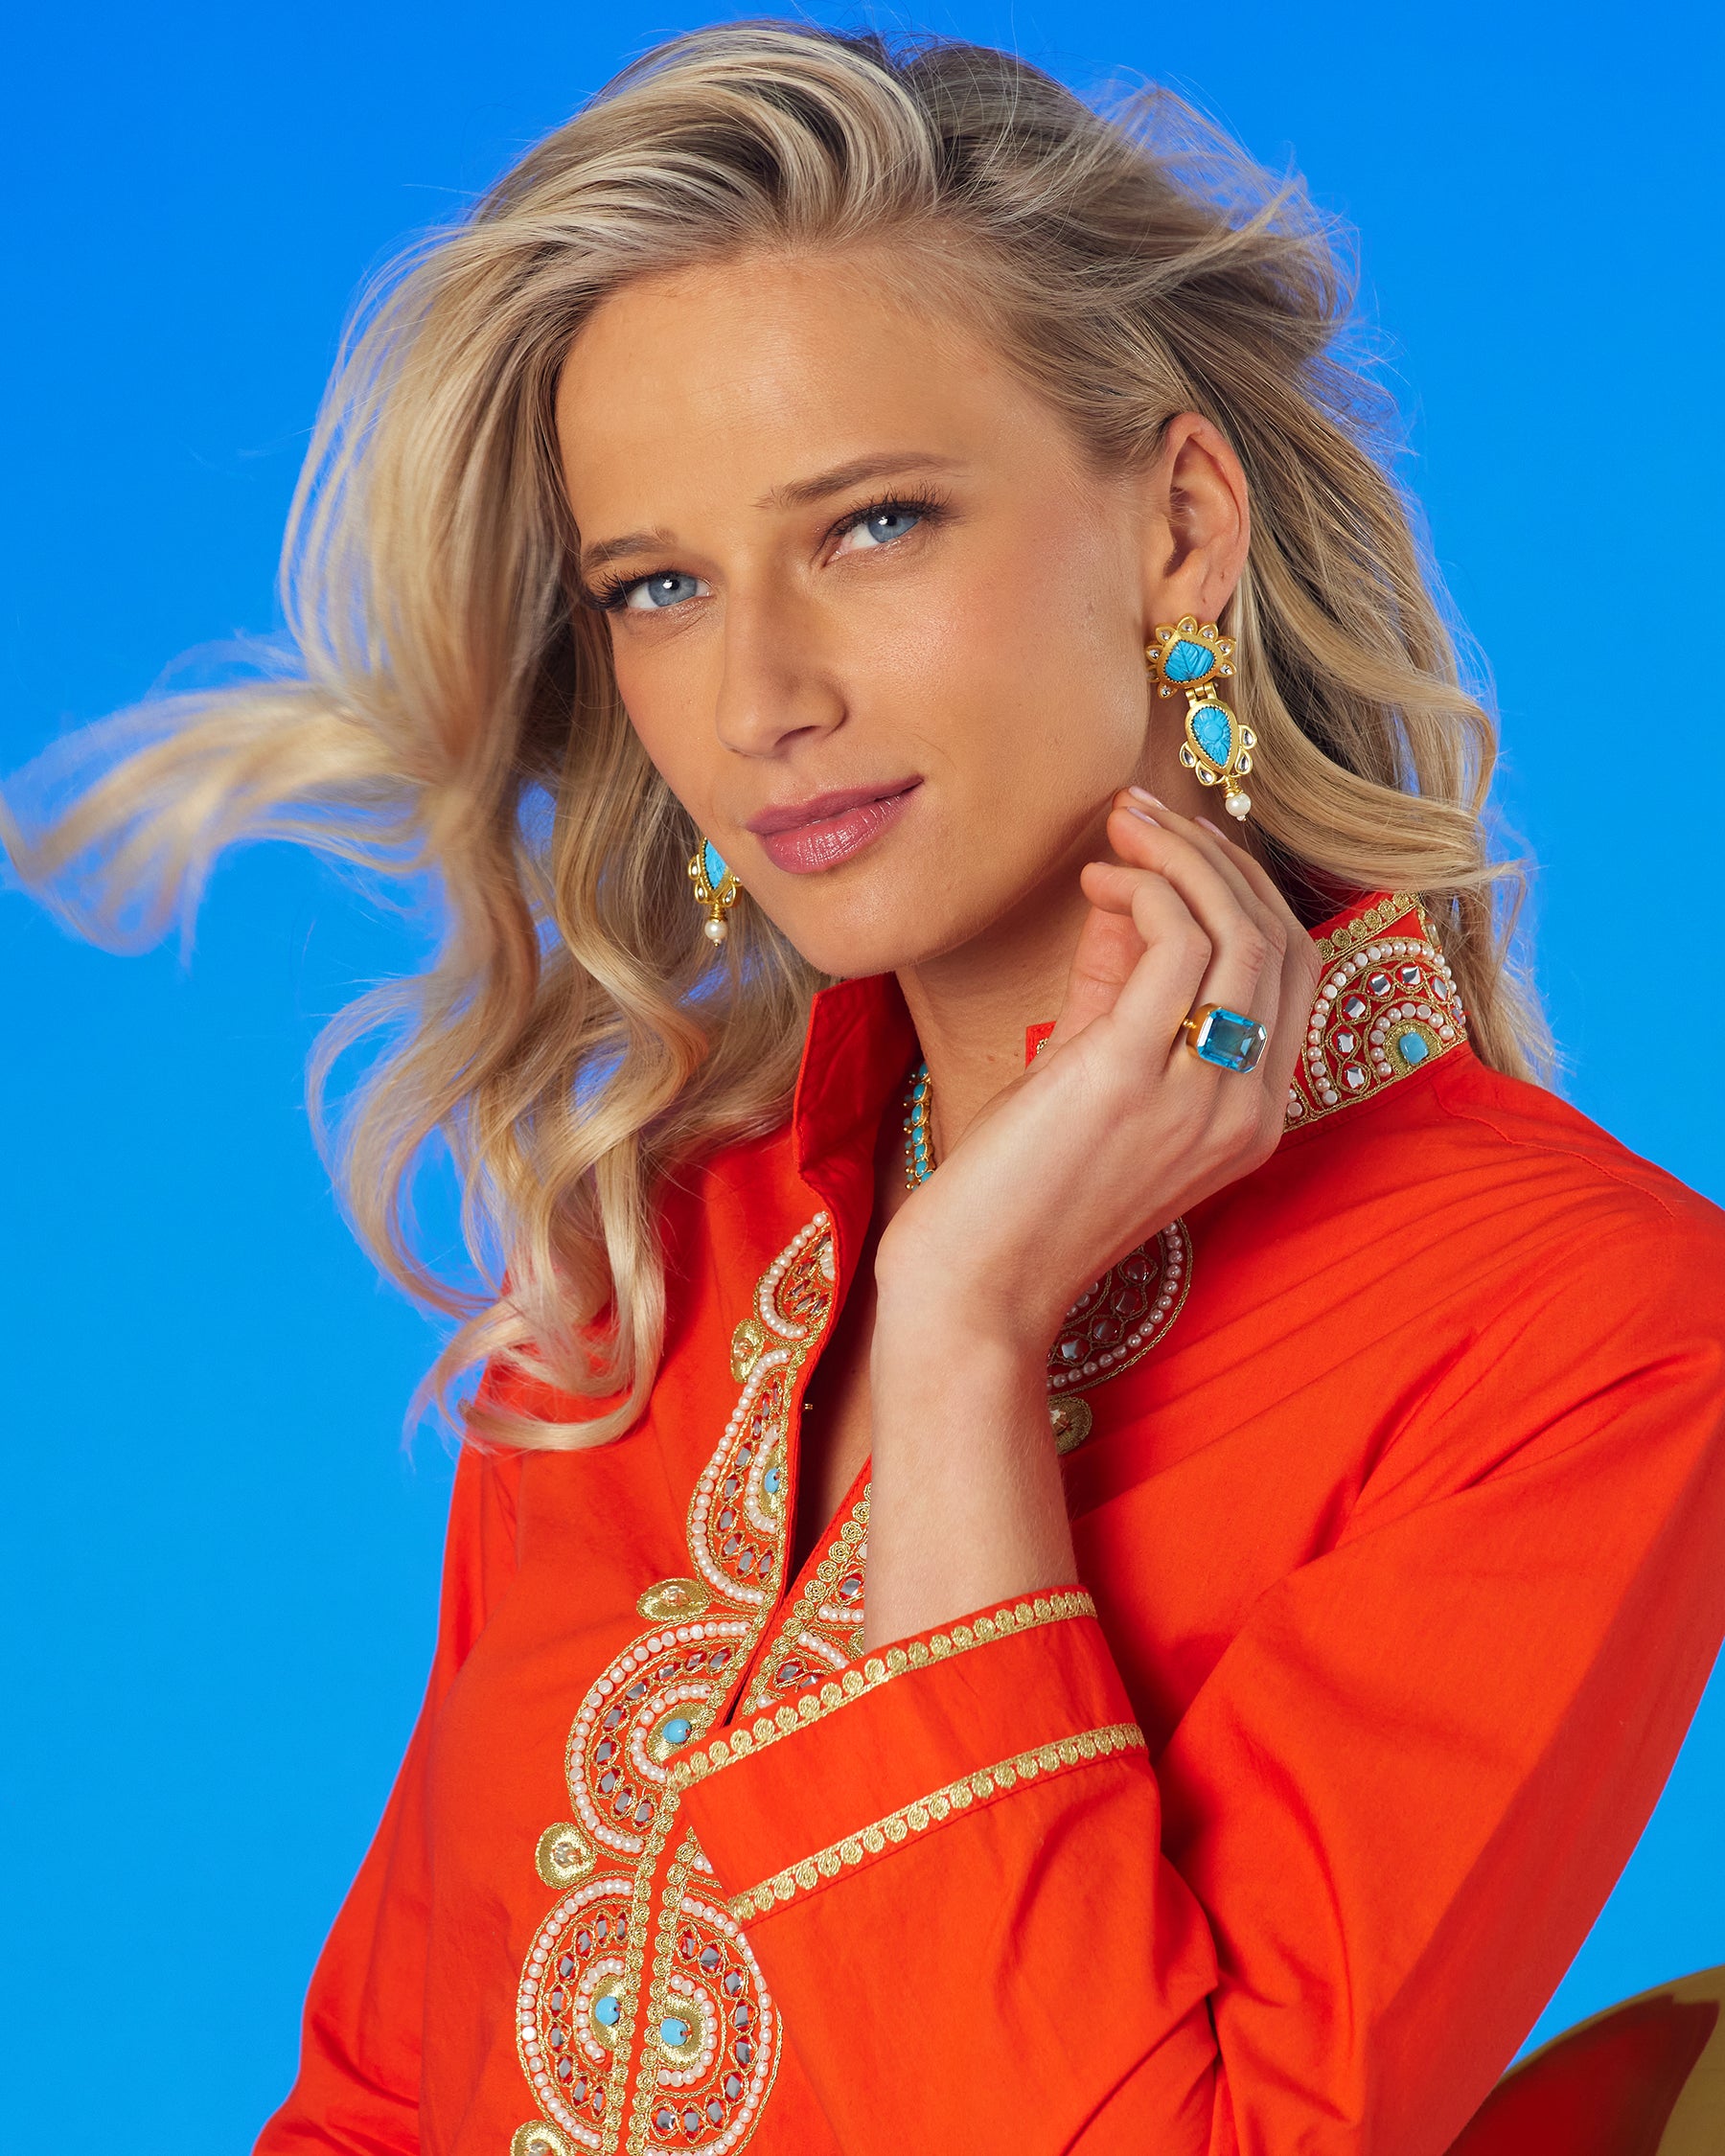 Portrait of model wearing Noor Orange Tunic with Gold Embellishment and hand to ear